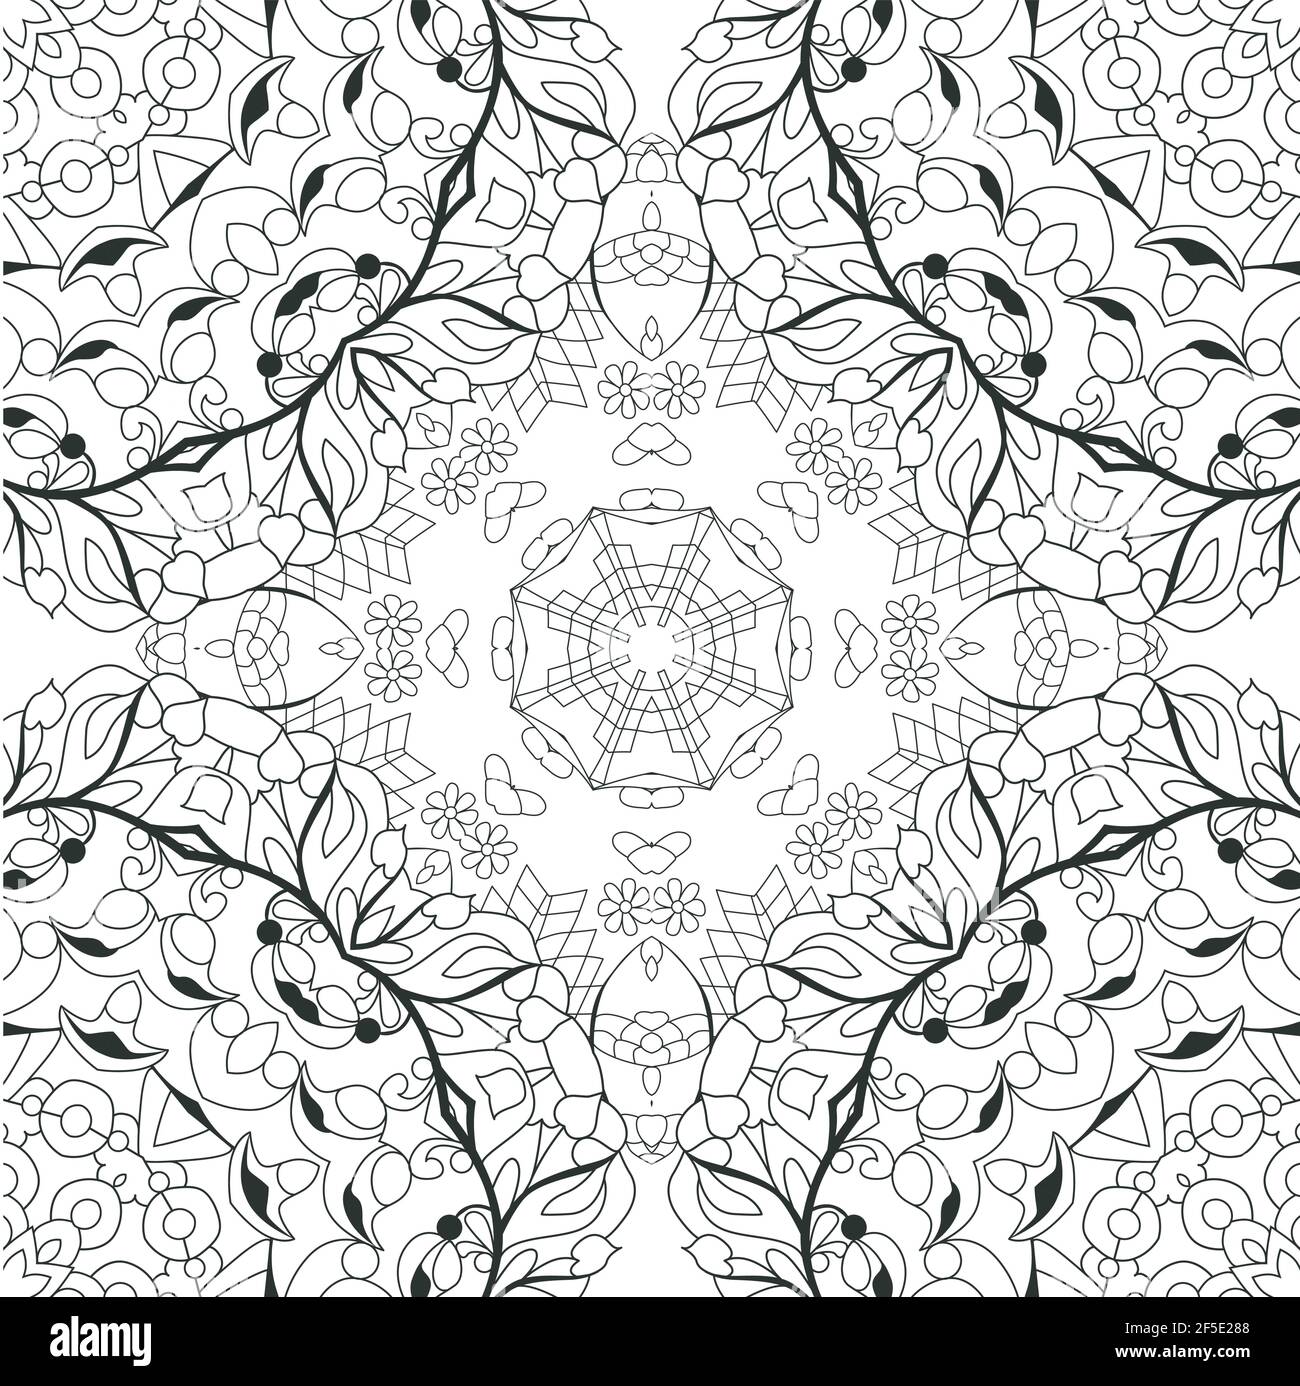 Vector adult coloring book seamless textures. Hand-painted art design. Adult anti-stress coloring page. Black and white hand drawn pattern for colorin Stock Vector